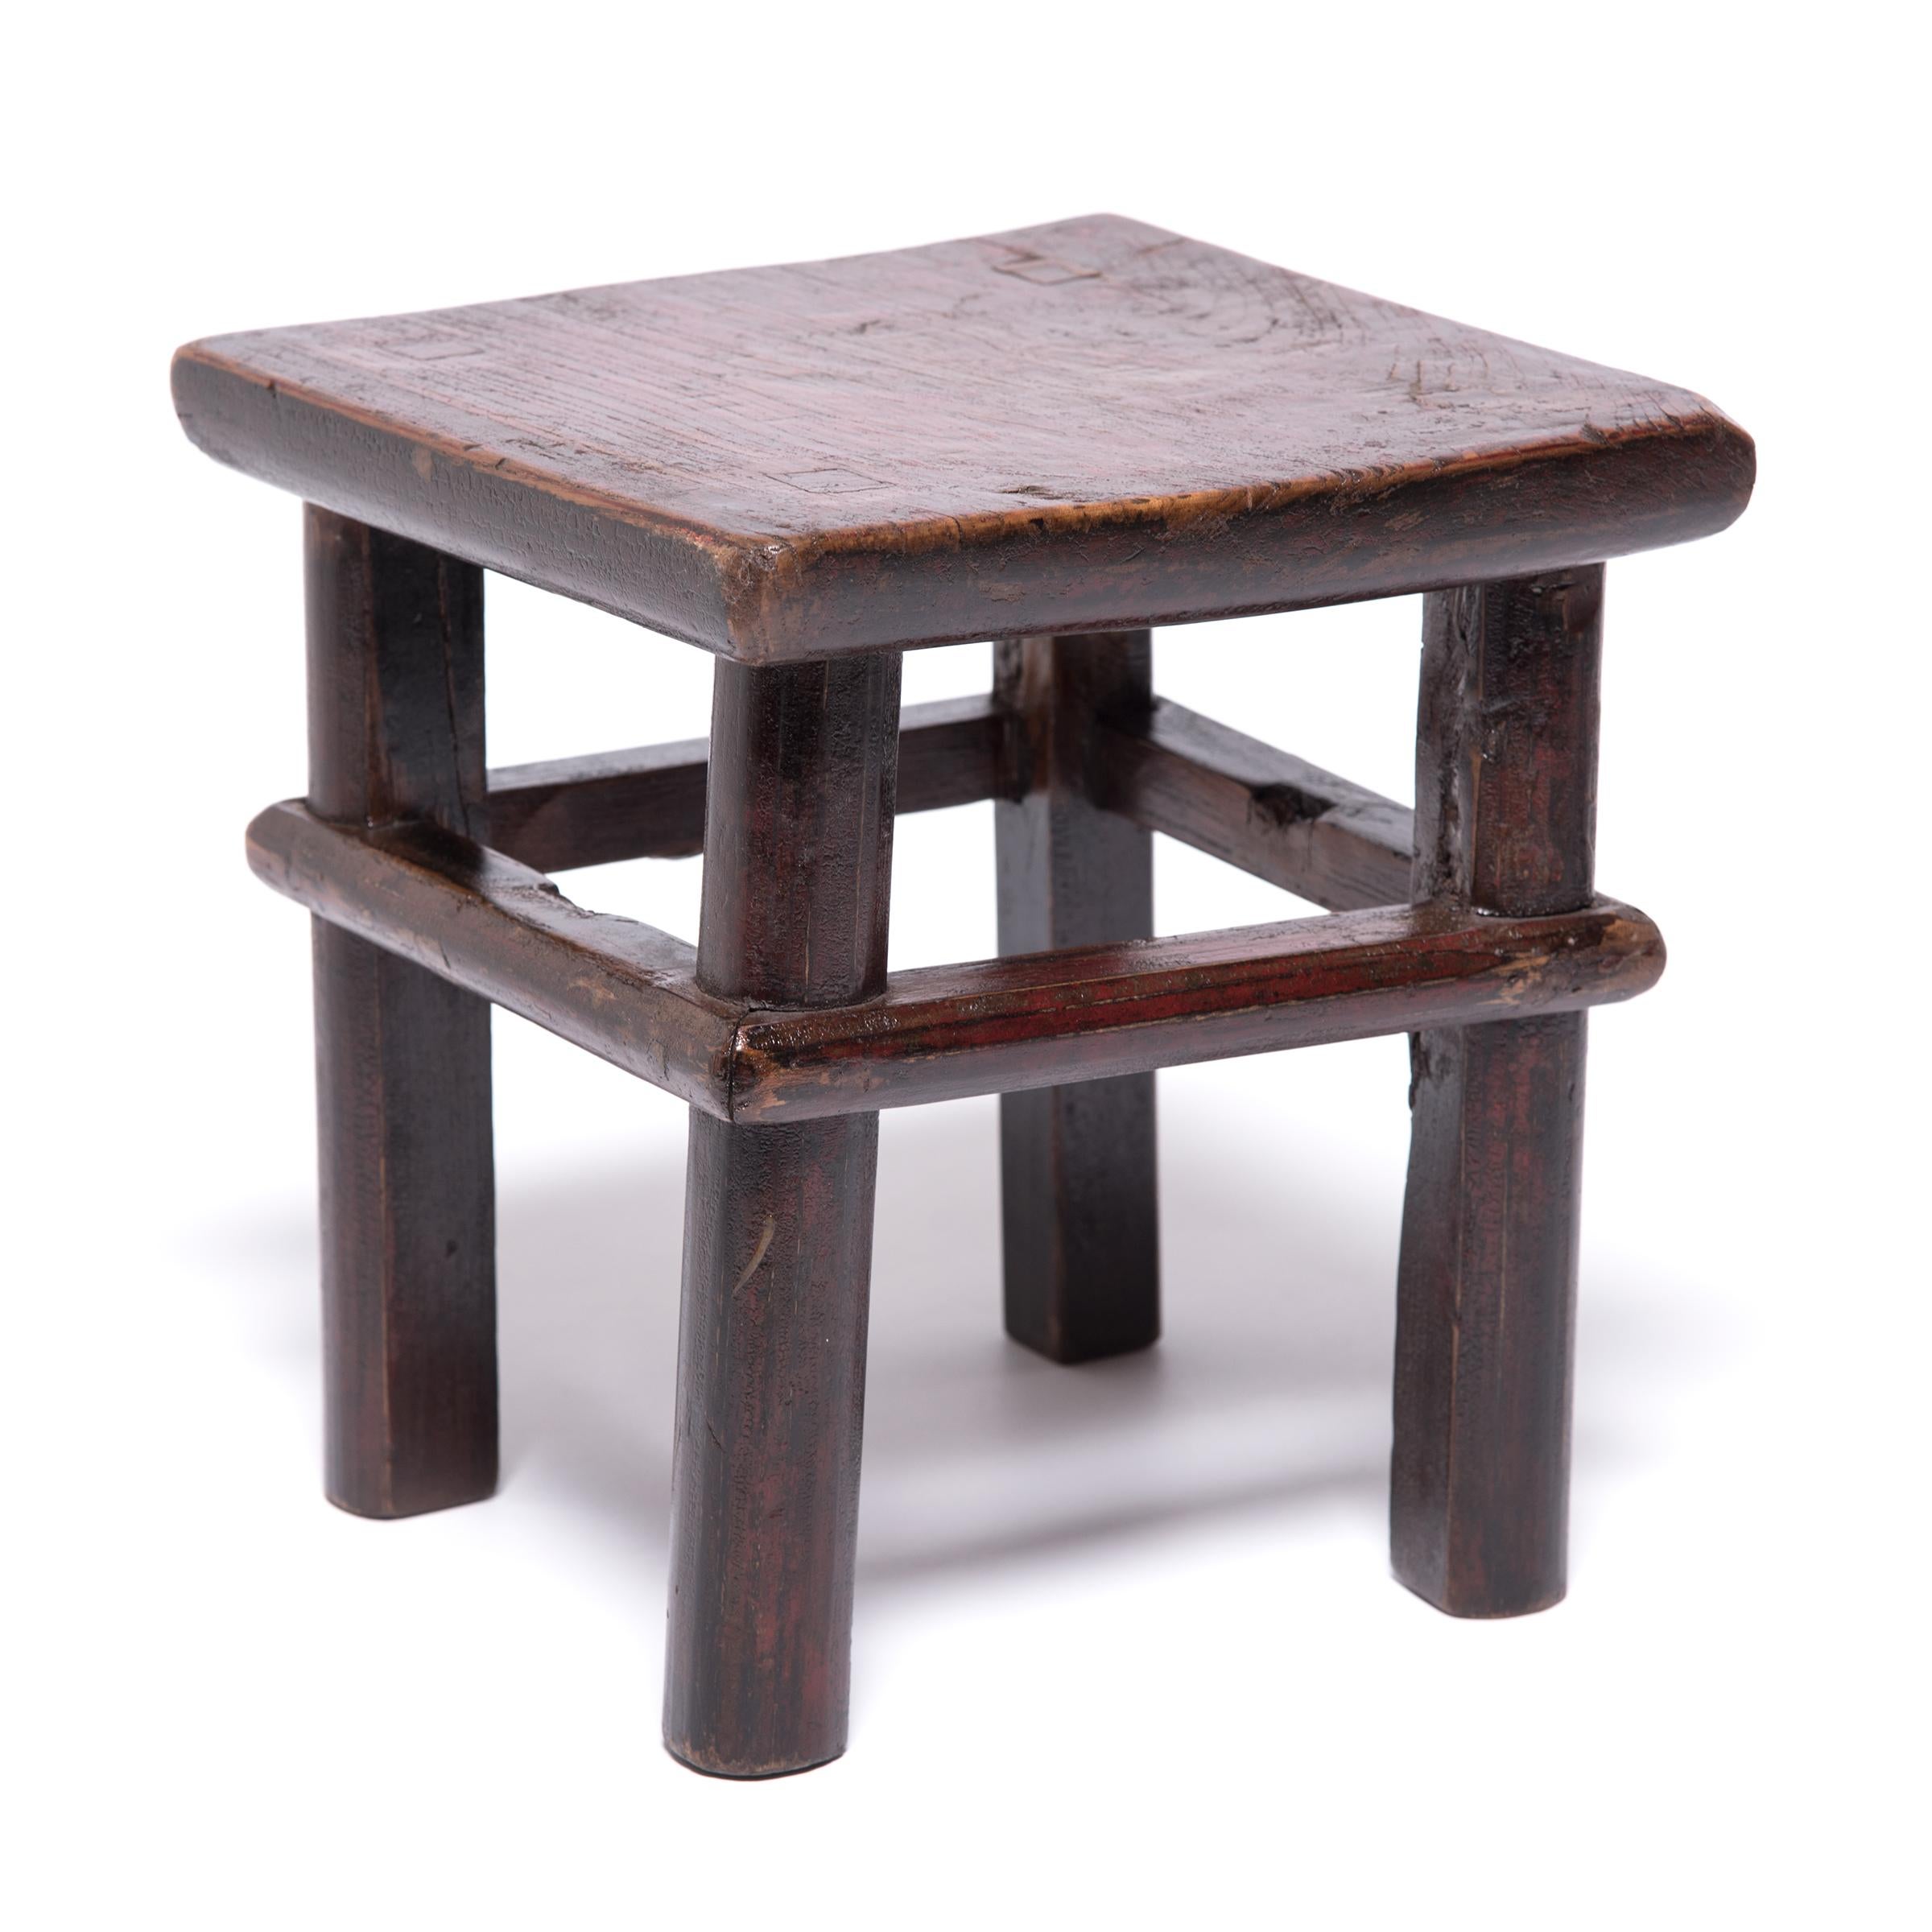 “Feng Deng,” which translates literally to square stool, remained a versatile form of casual seating in Chinese households well into the 20th century. Chinese carpenters of the Qing Dynasty held simplicity and craftsmanship in equal regard. In this